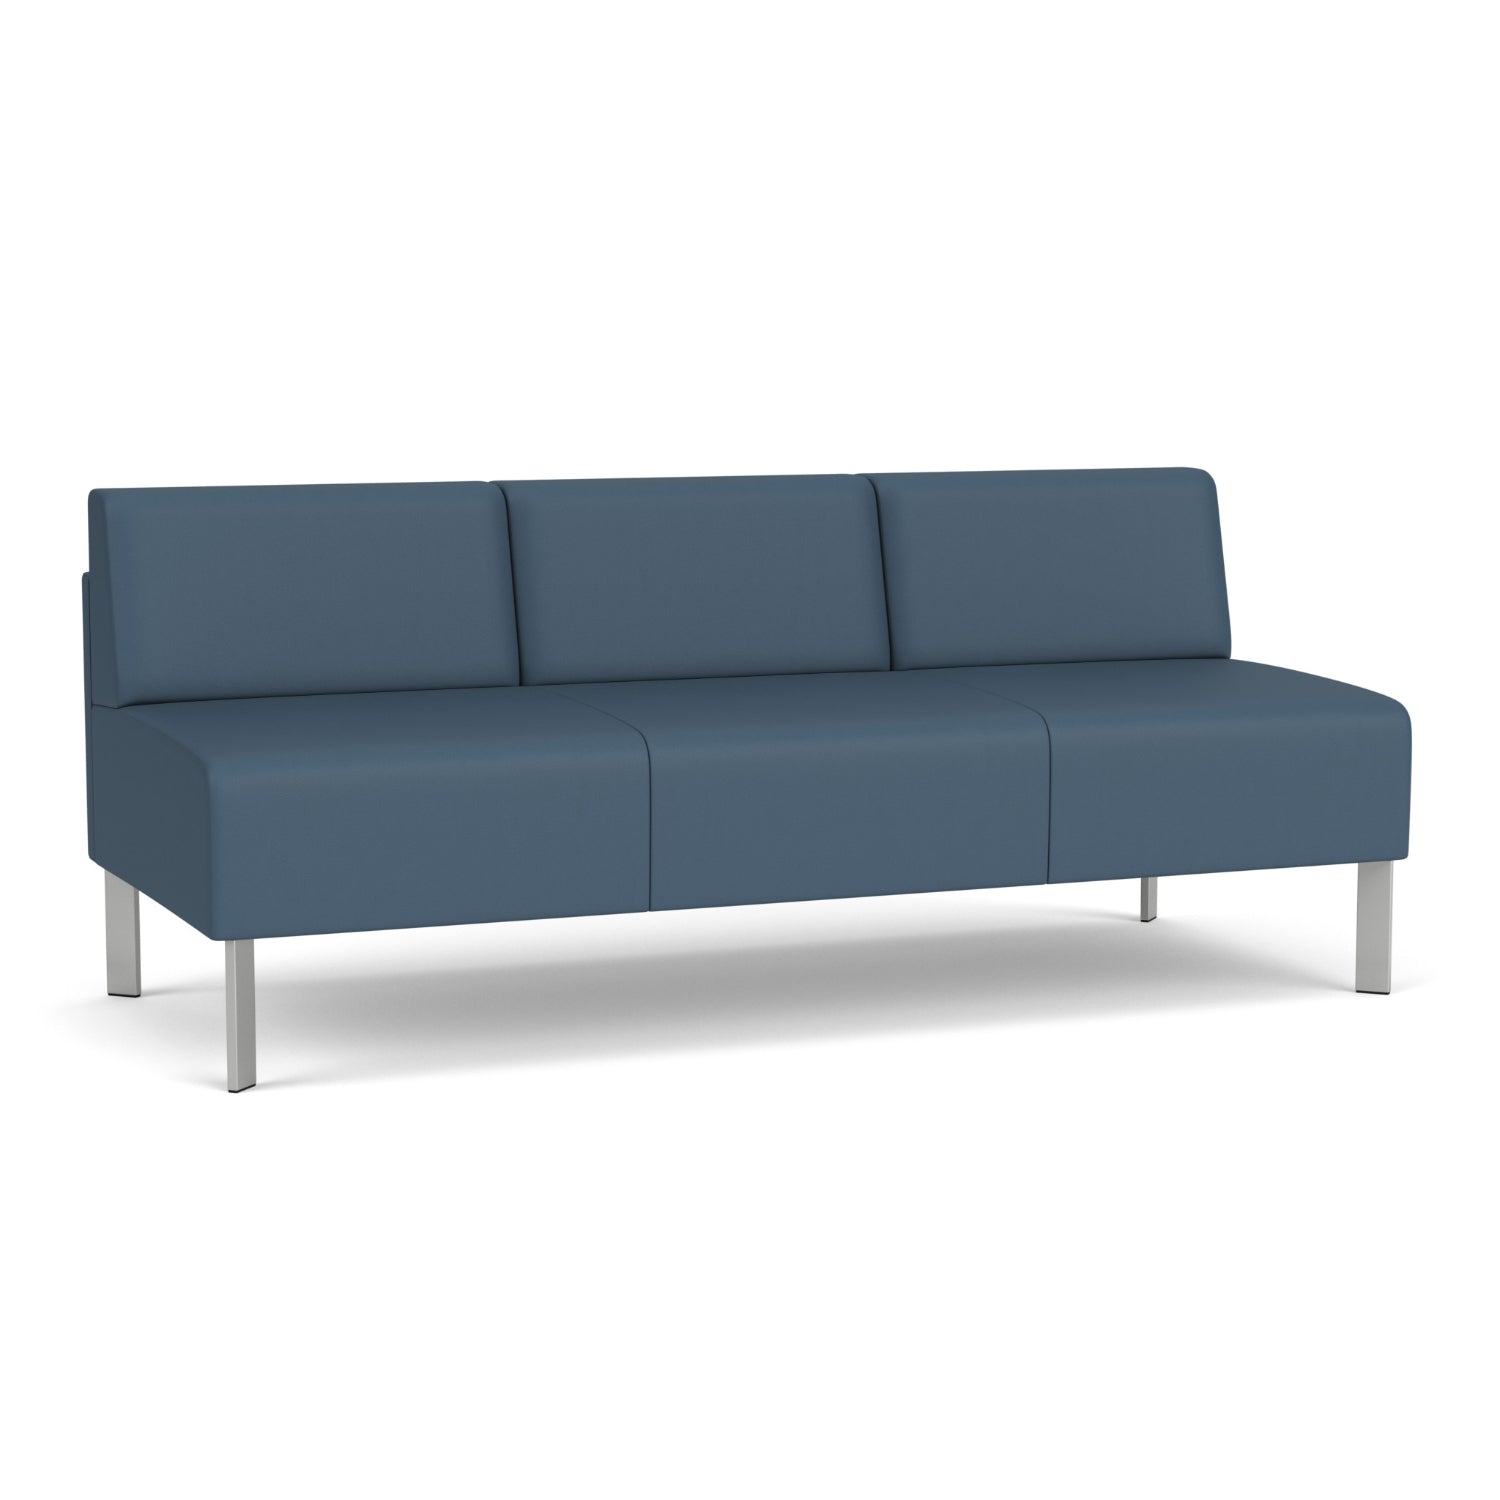 Luxe Collection Reception Seating, Armless Sofa, Standard Vinyl Upholstery, FREE SHIPPING